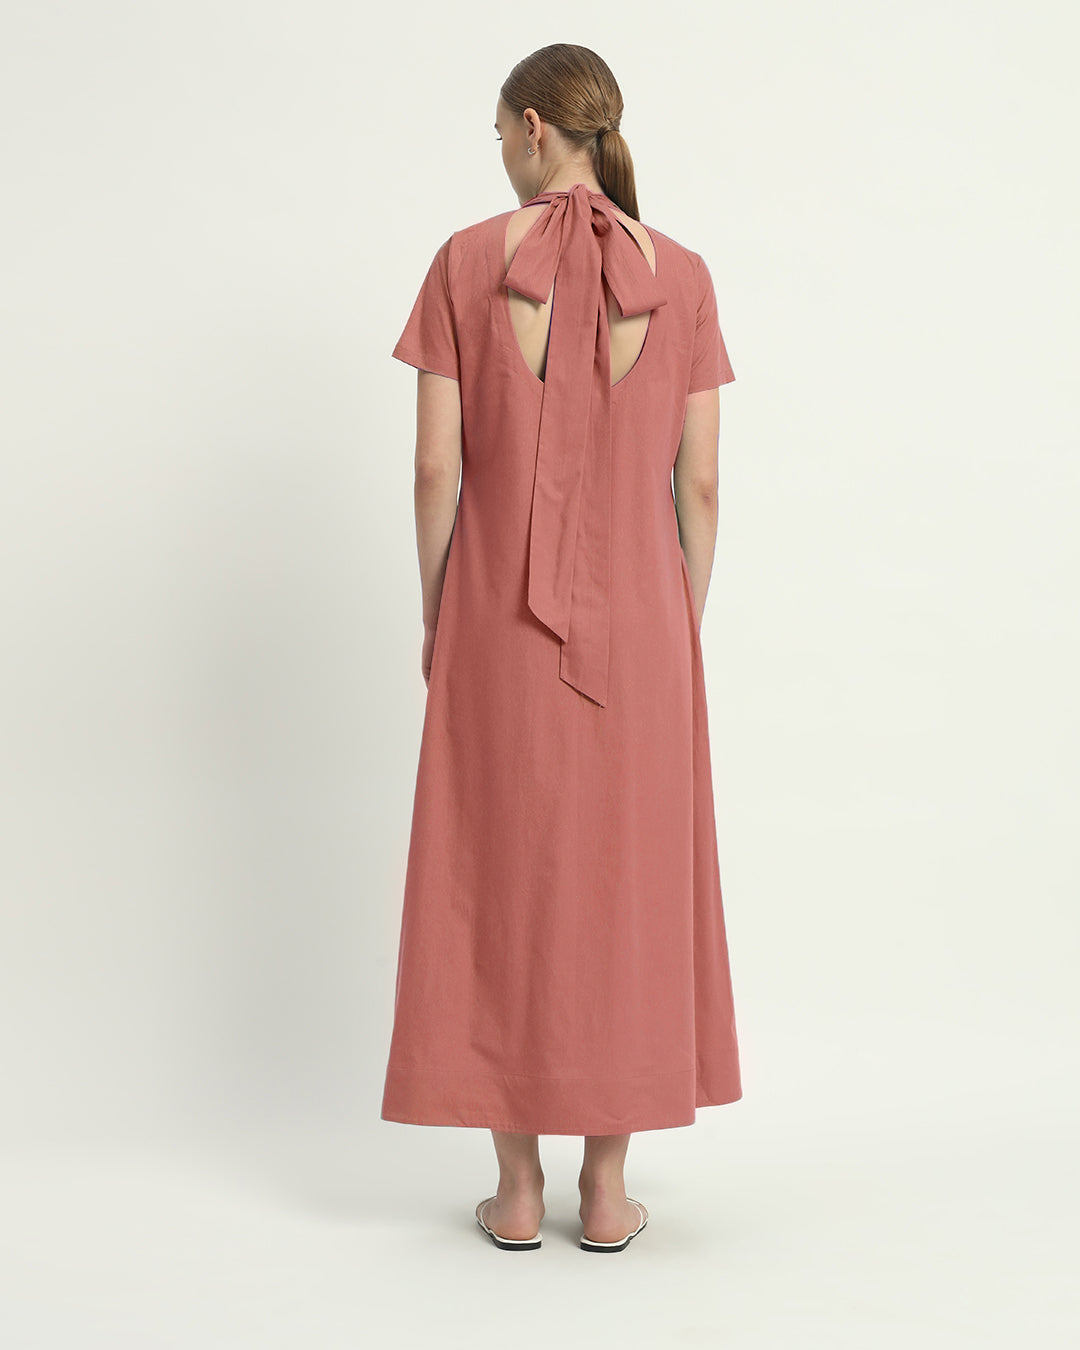 The Ivory Pink Hermon Cotton Dress